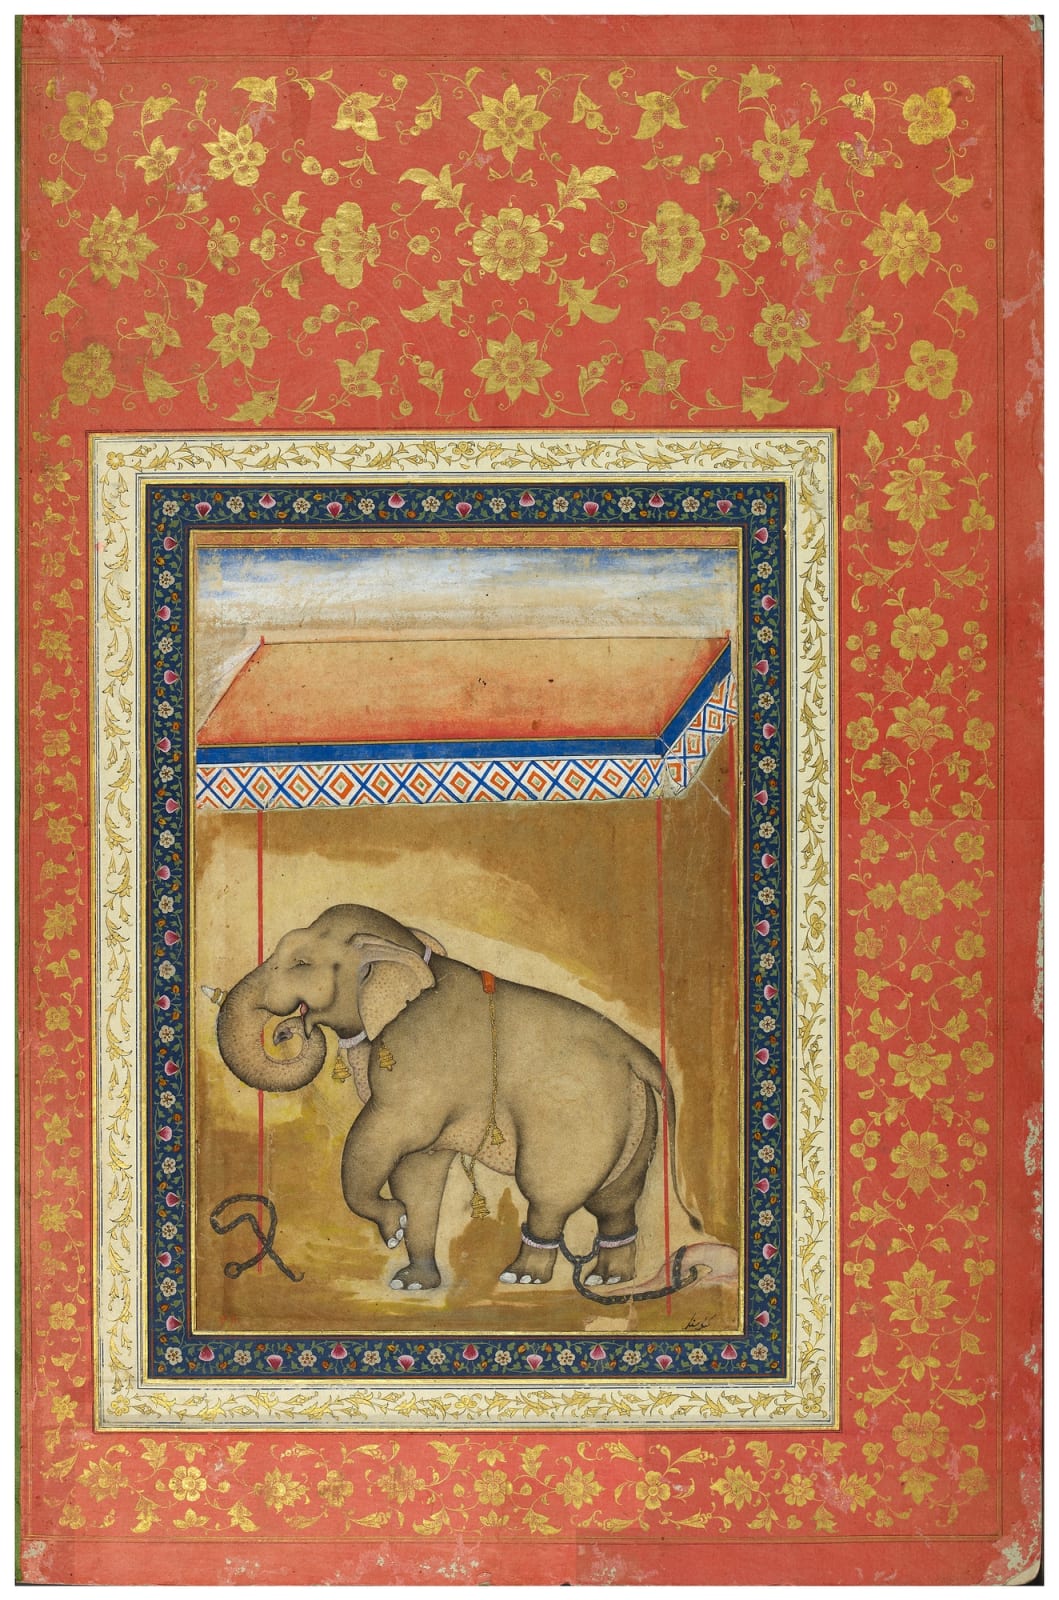 A Tethered Favourite Elephant with an Inscription naming Kanak Singh, Mughal, 1590s